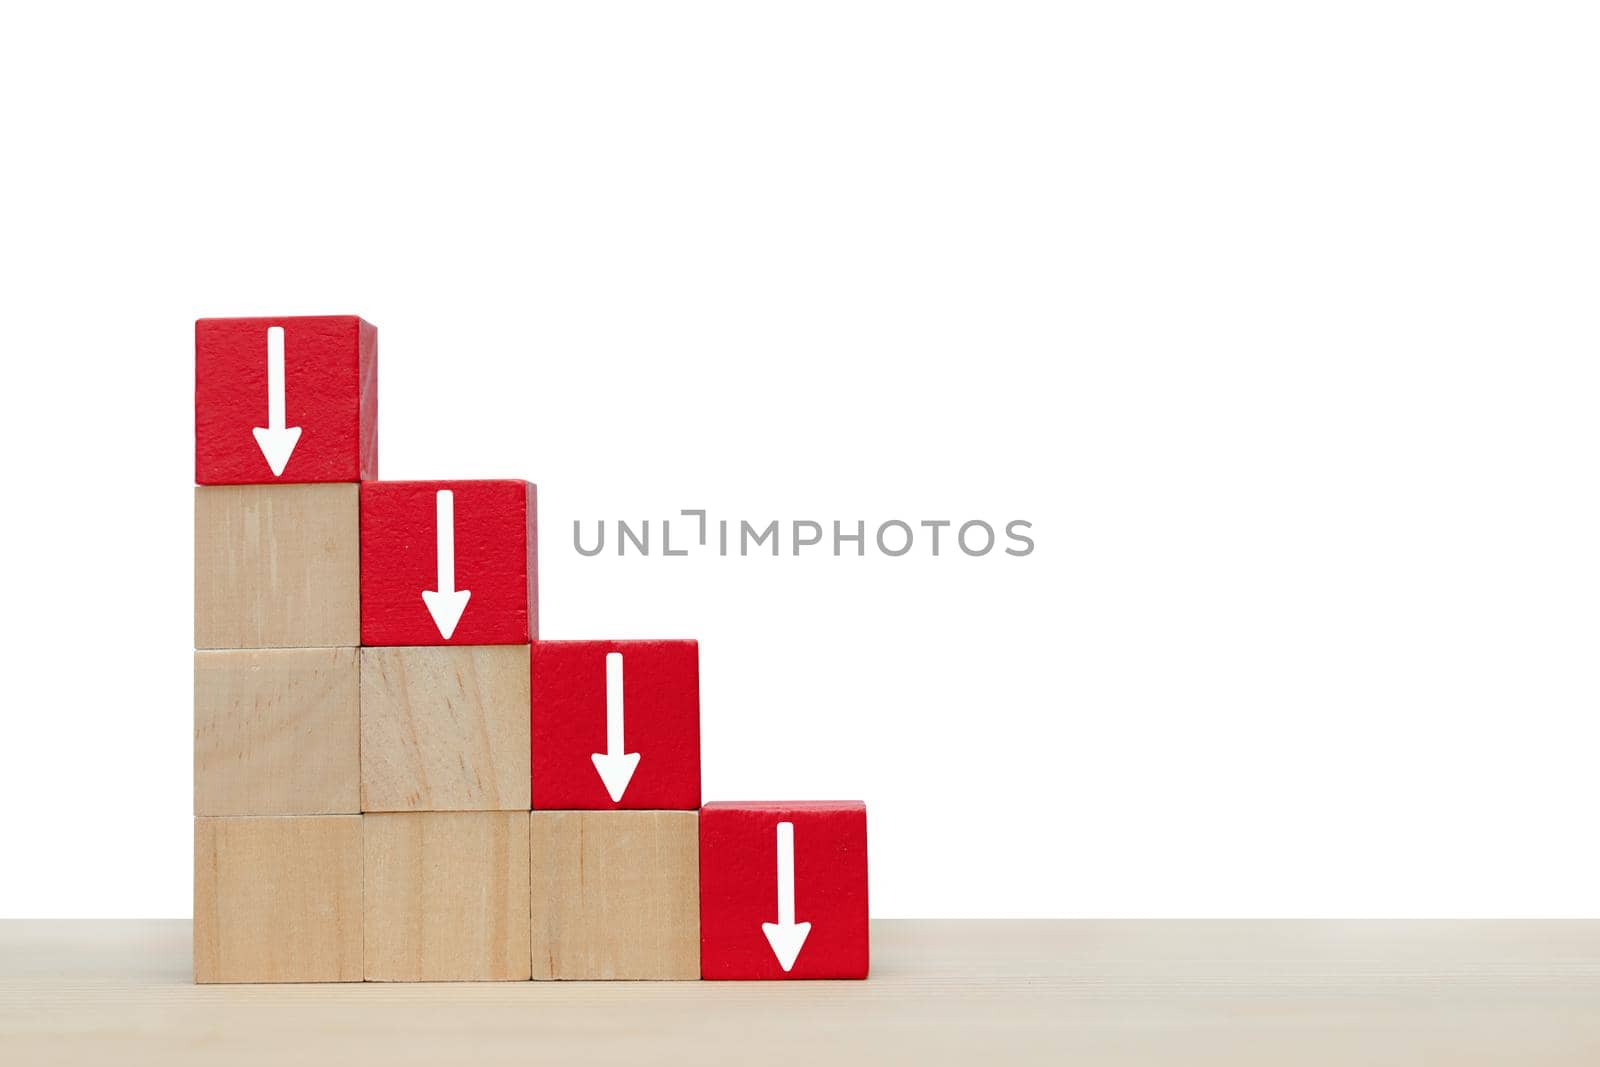 Arrow pointing down on red wooden block.  Symbol of the fall of investment or businesses